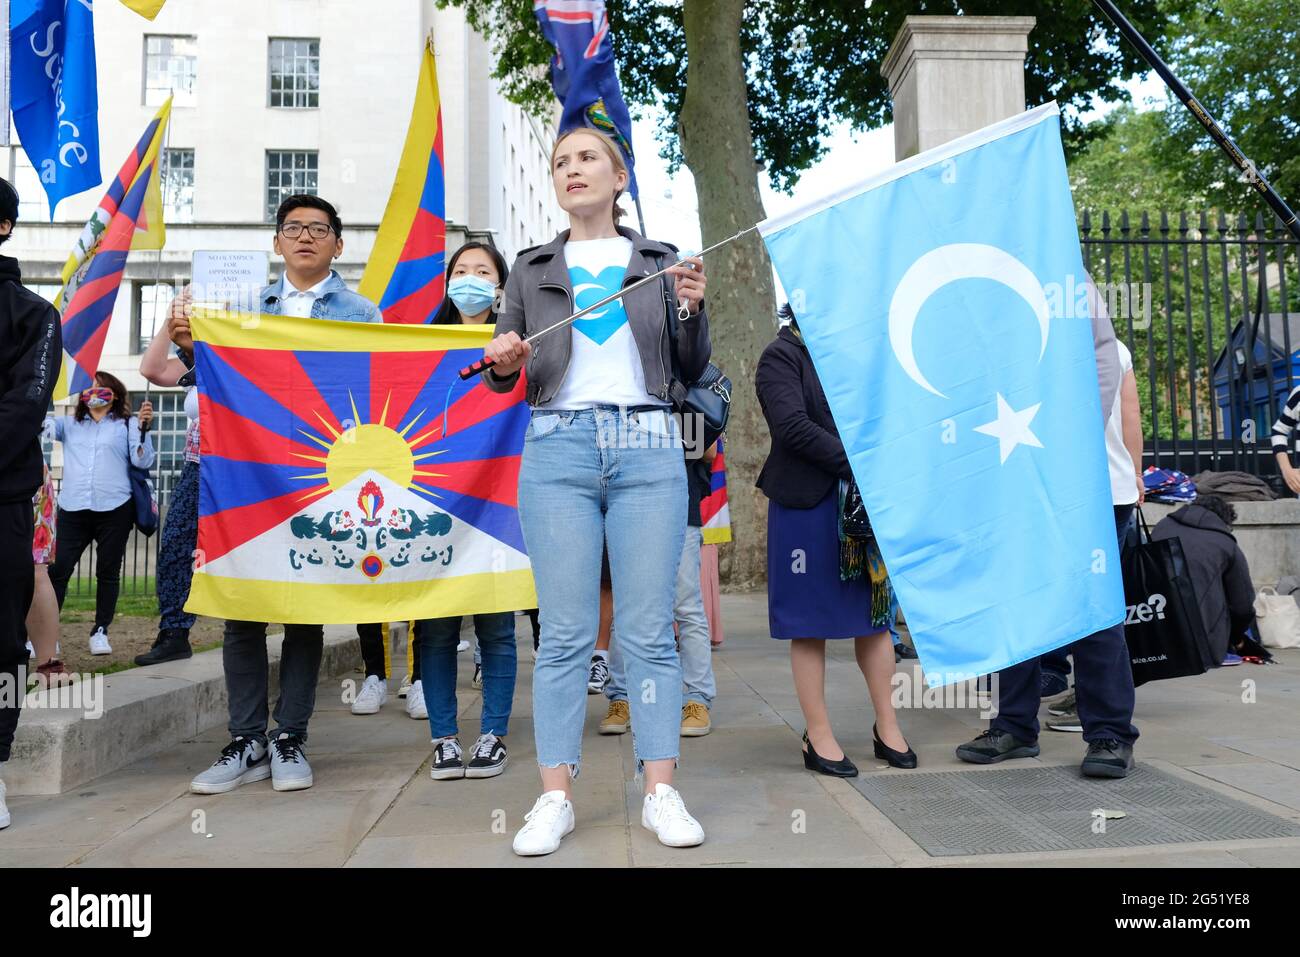 Uyghur, Tibetan and minority groups gather to call for a boycott of the 2022 Winter Olympic Games over human rights abuses Stock Photo